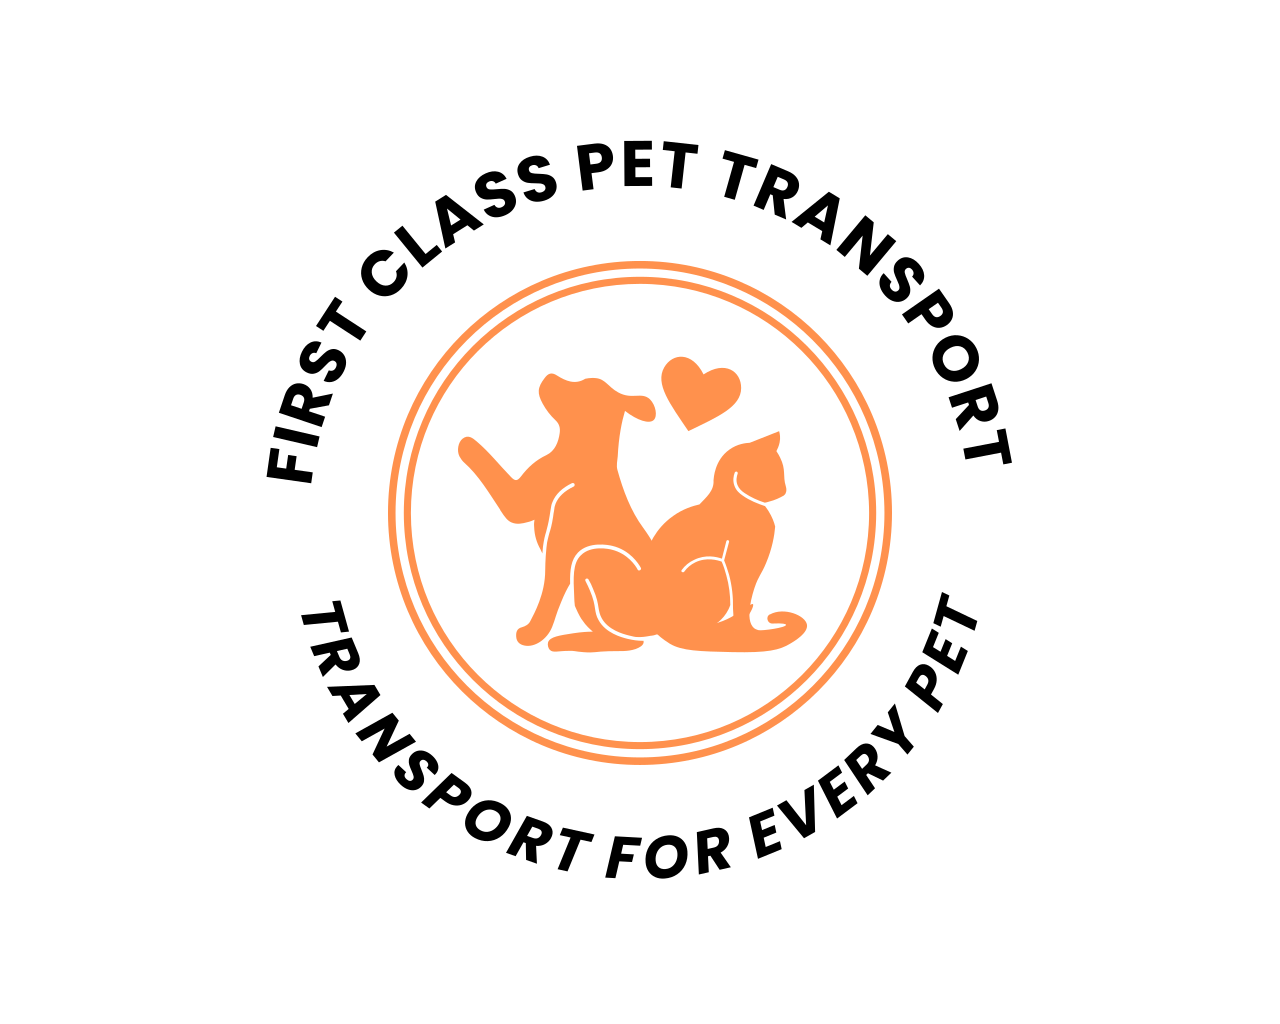 First Class Pet Transport's web page